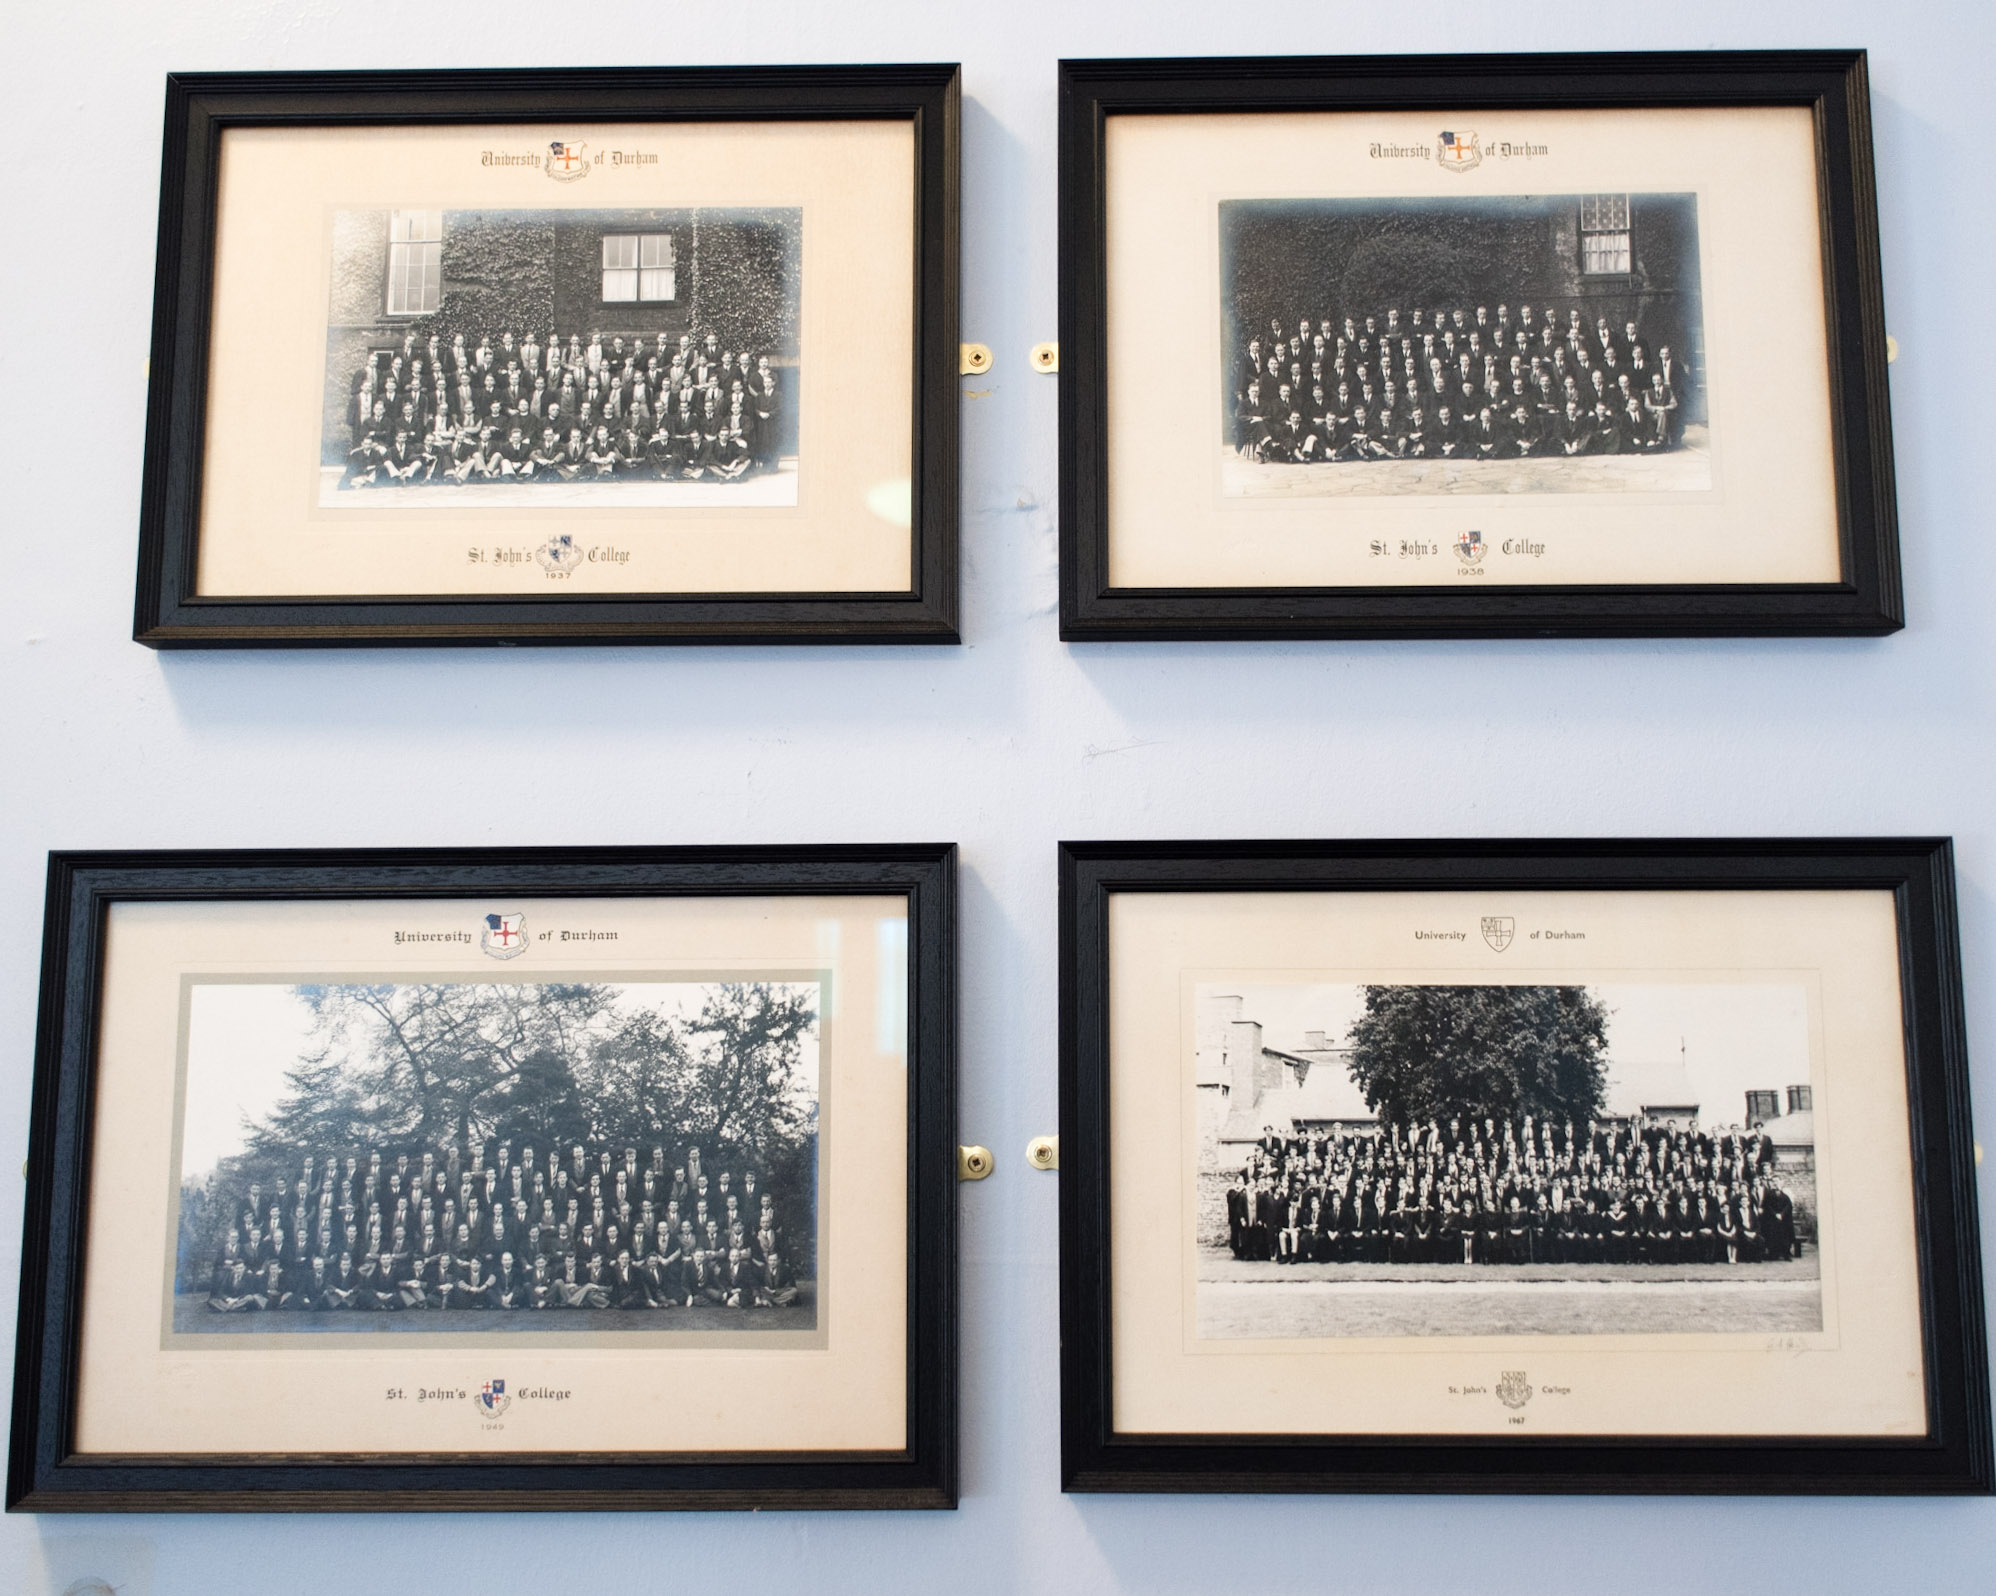 Framed black and white photographs of past students